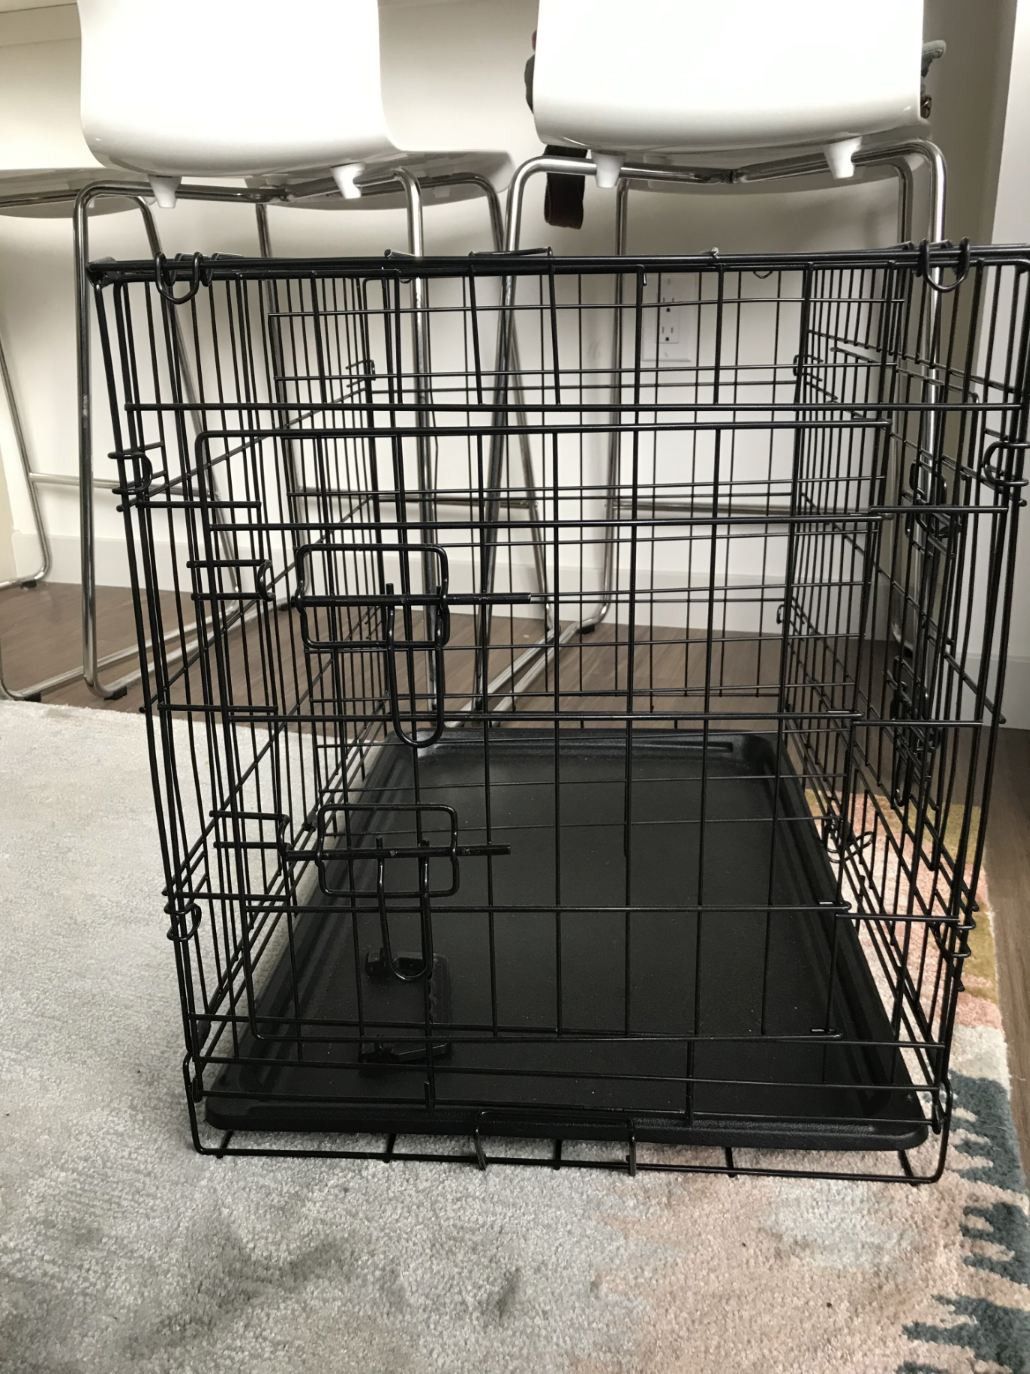 24" Dog Crate - Collapsable - Never Used - $15